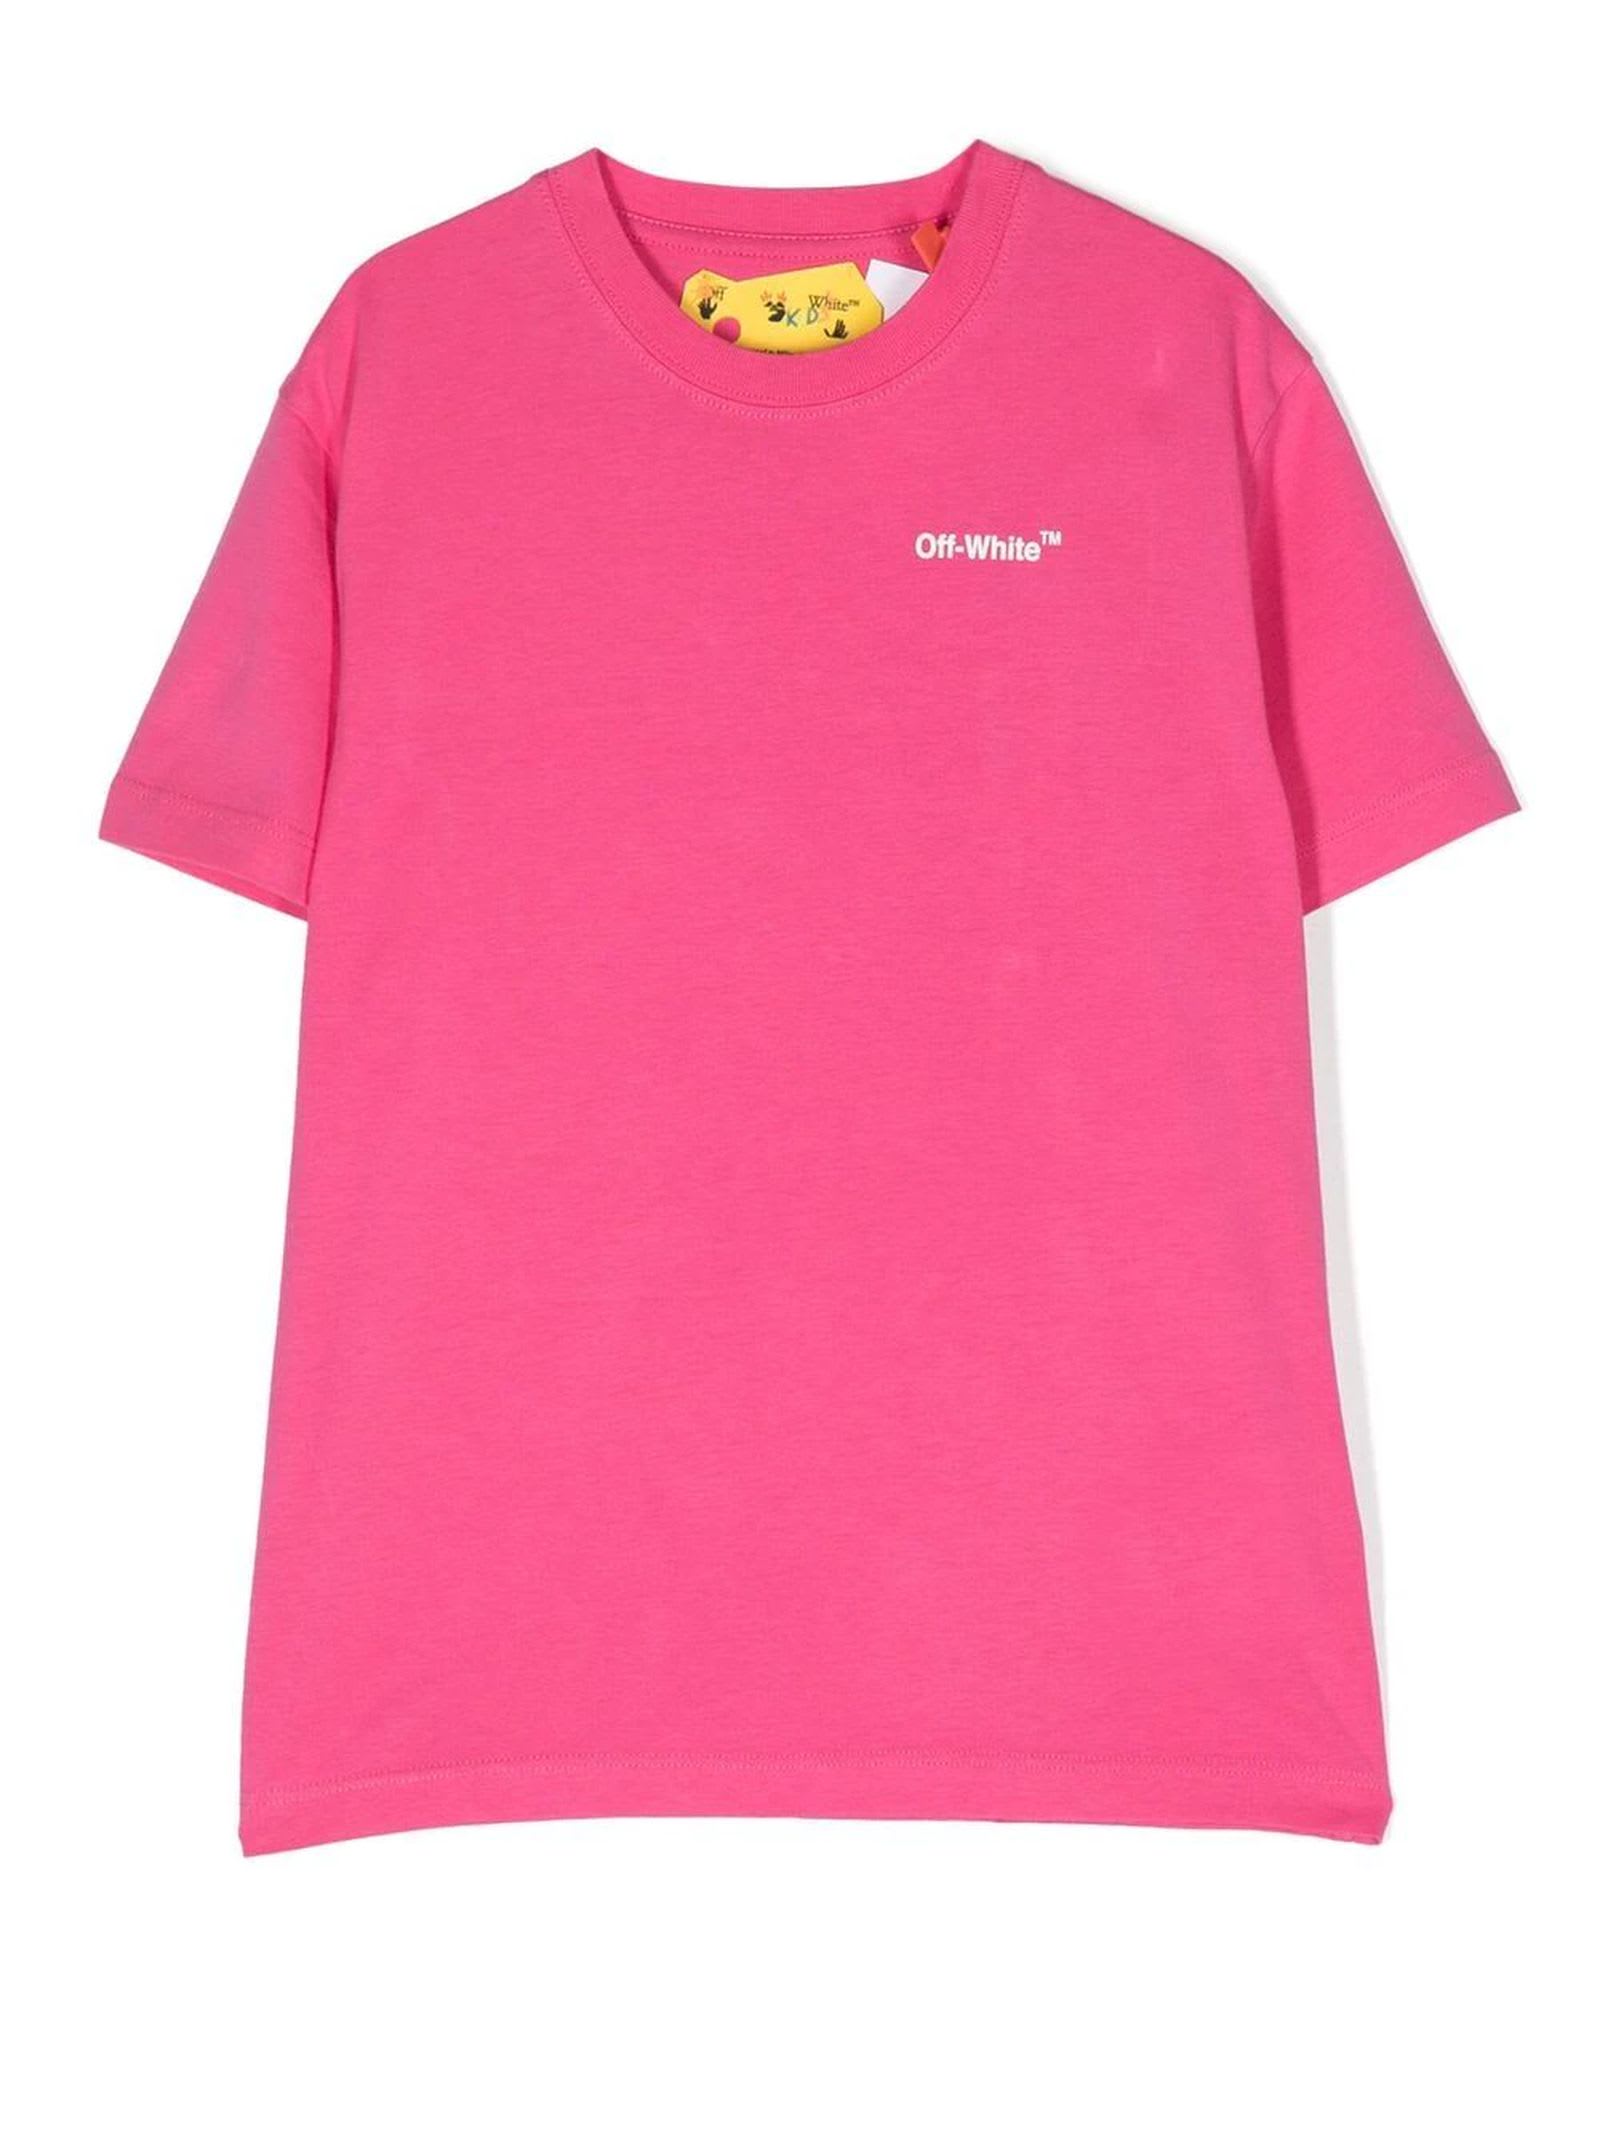 Off-White Pink Cotton T-shirt